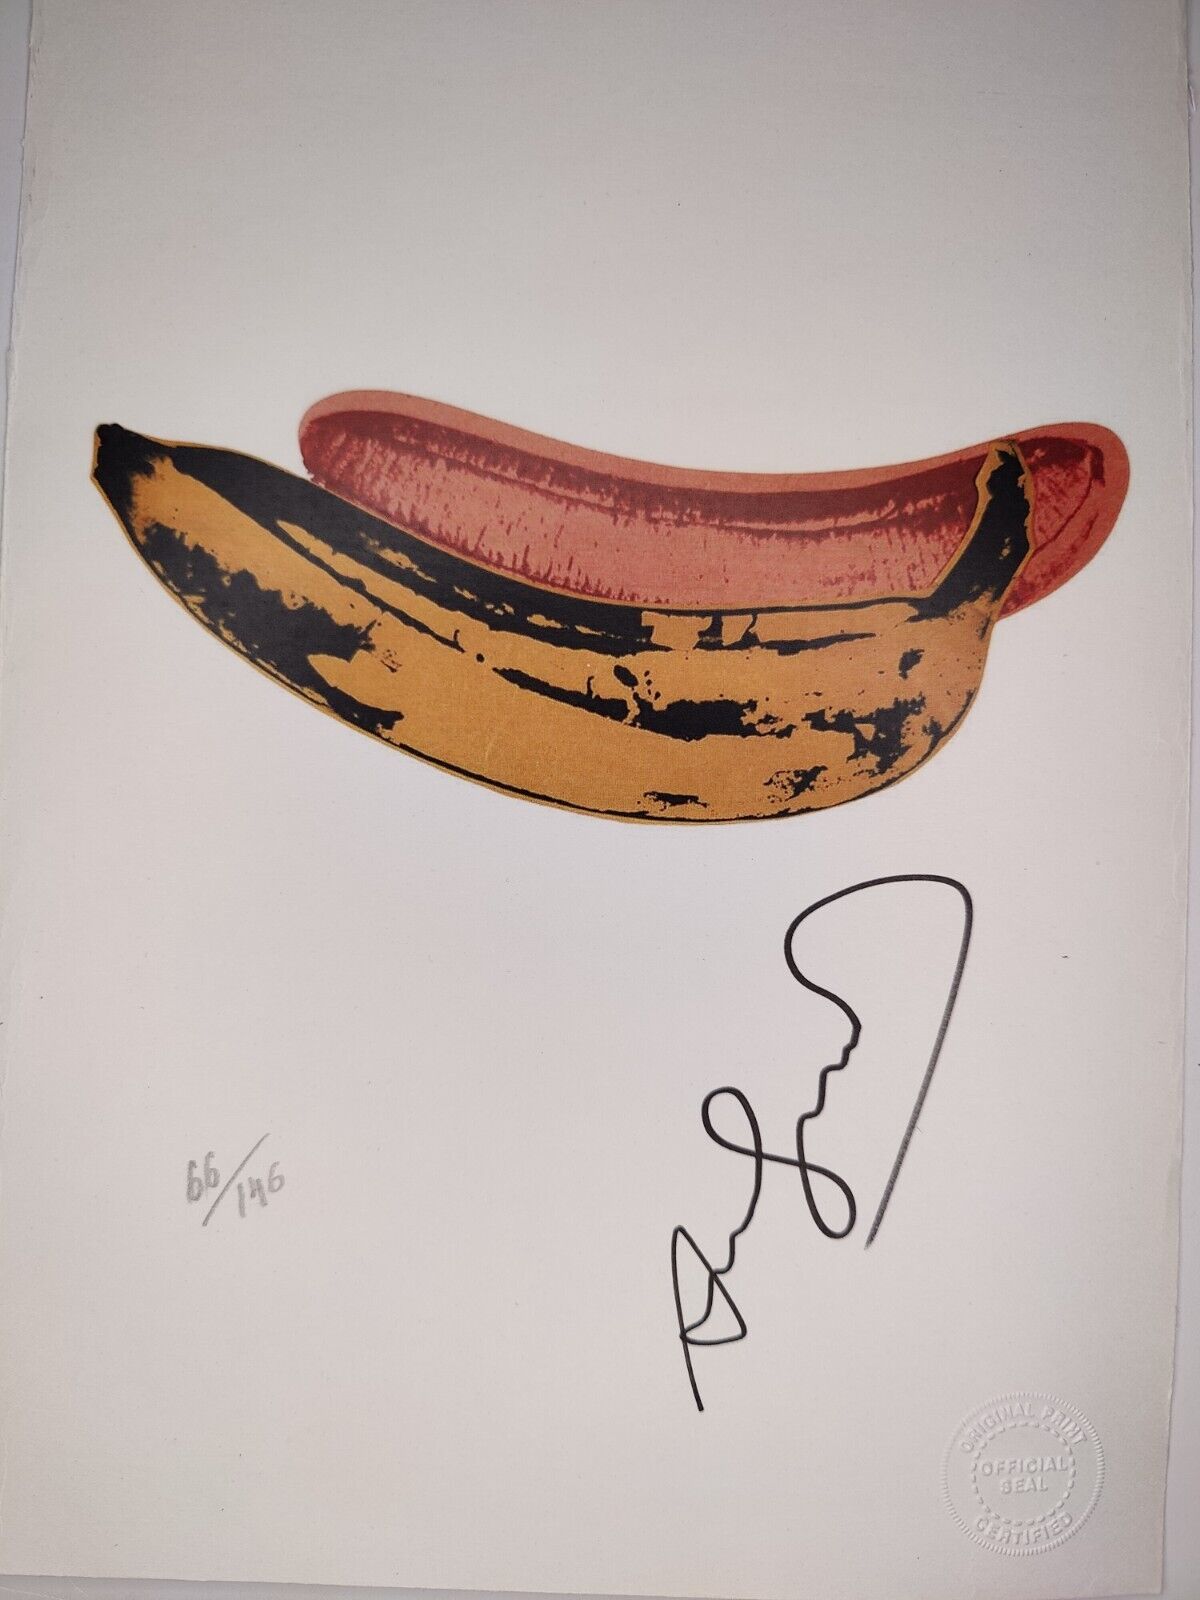 Andy Warhol COA Vintage Signed Art Print on Paper Limited Edition Signed